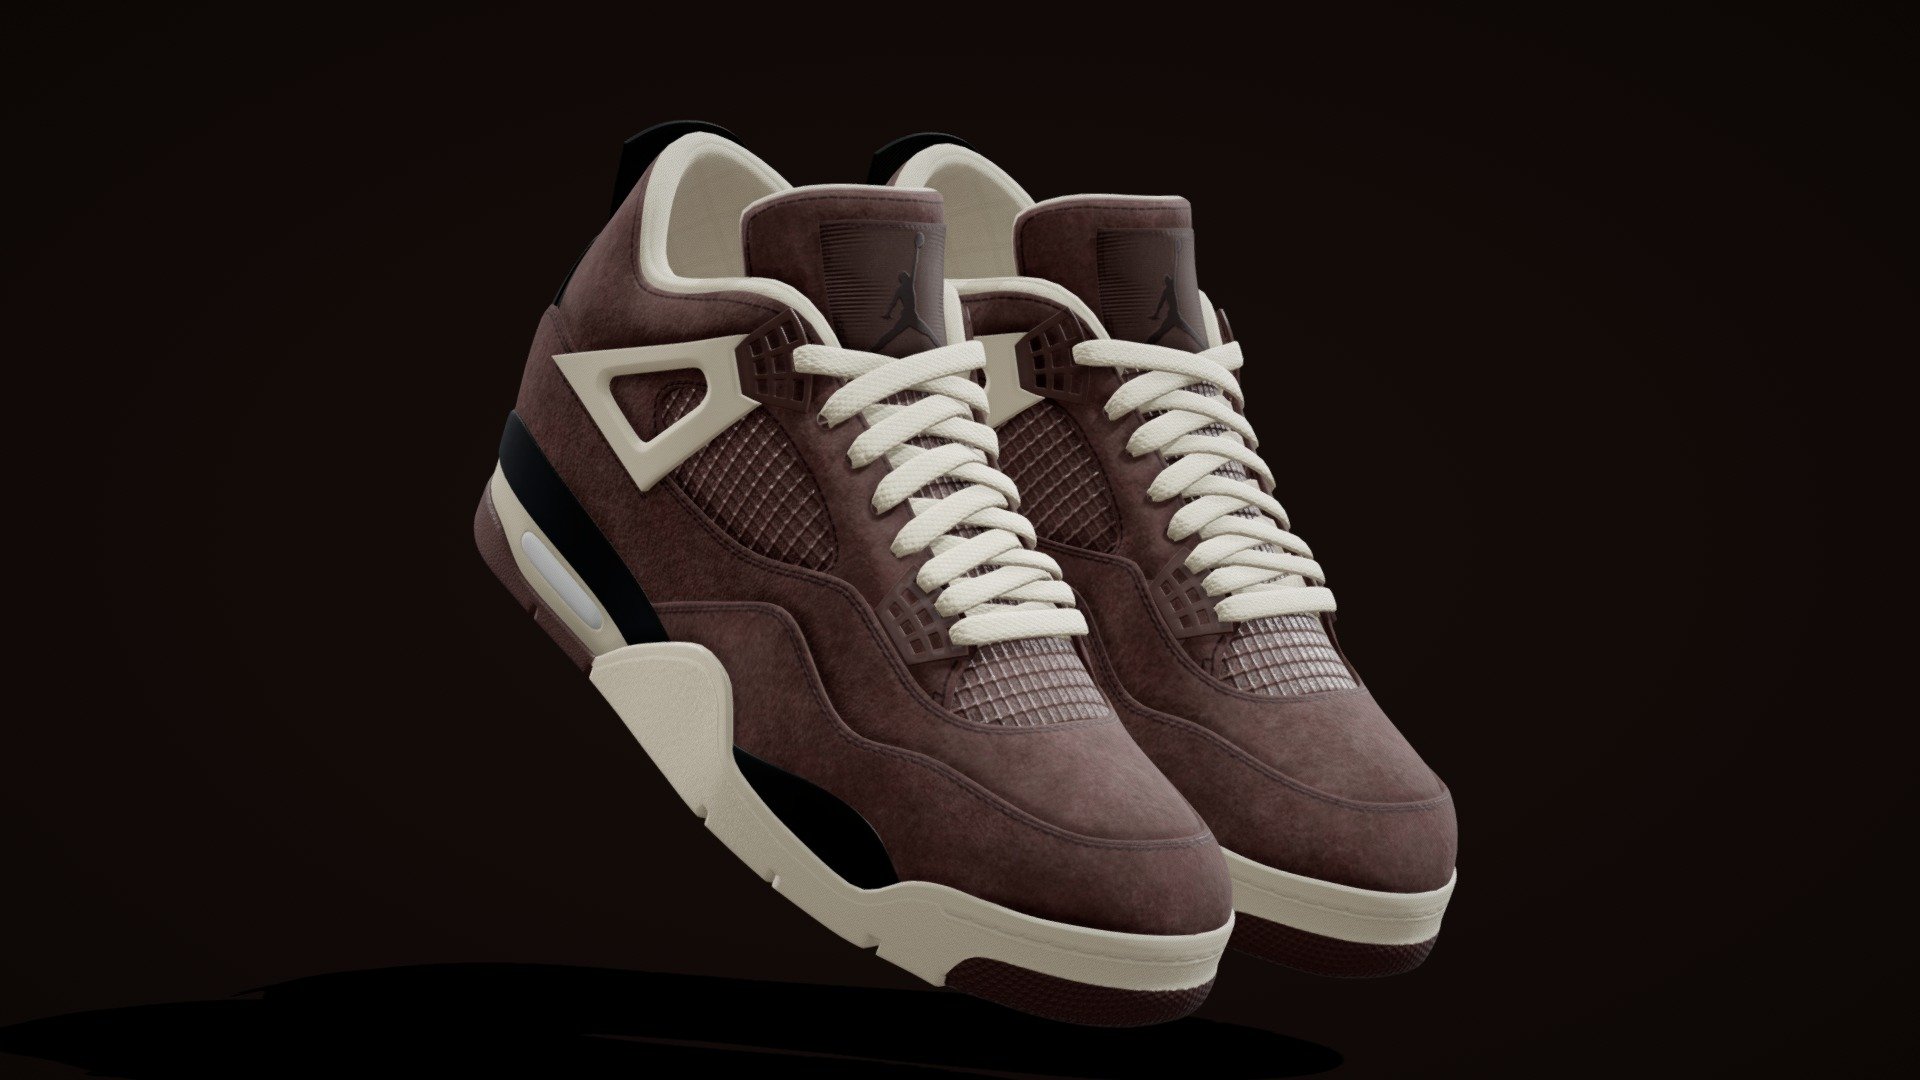 Here is a pair of high qulity Nike Shoes Air Jordan 4

2 Materals

4k Textures

140000 Poly

Great for any render project

Feel free to Comment or contact for any query 3d model